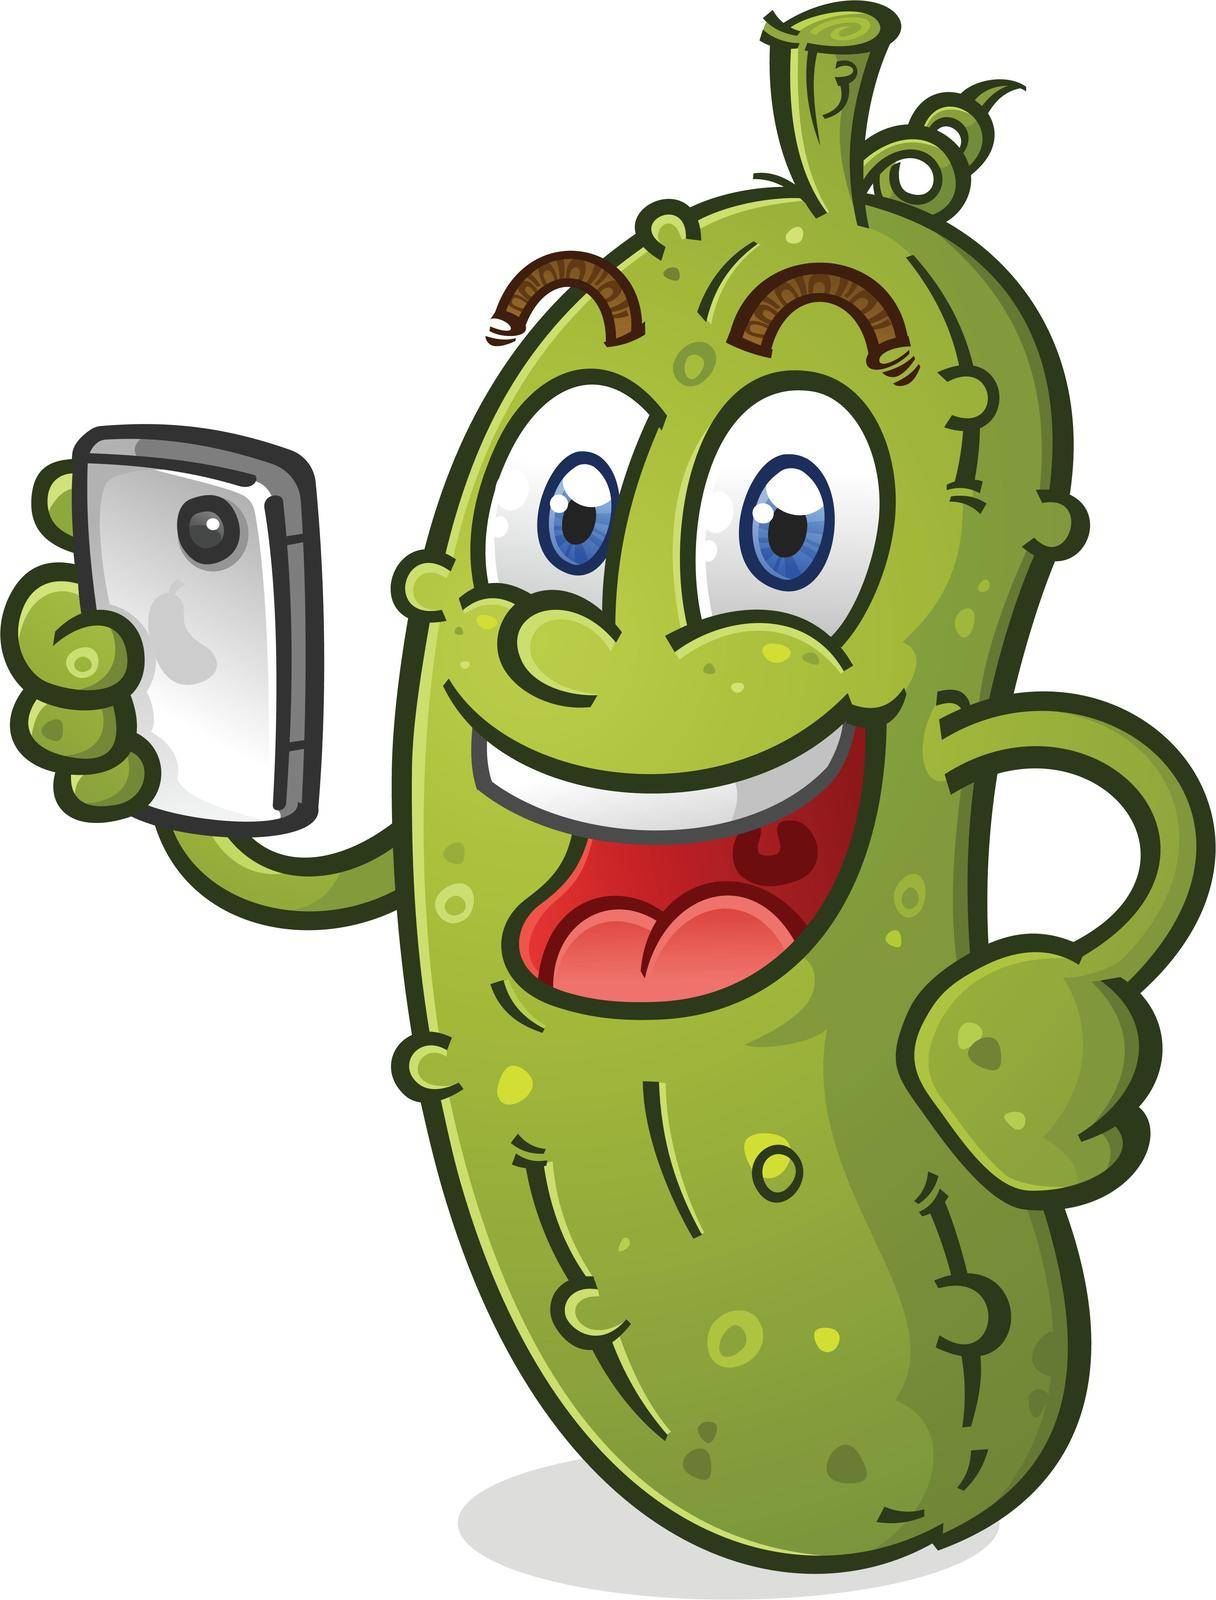 Happy Pickle Cartoon Character Using a Mobile Phone by Oshlick